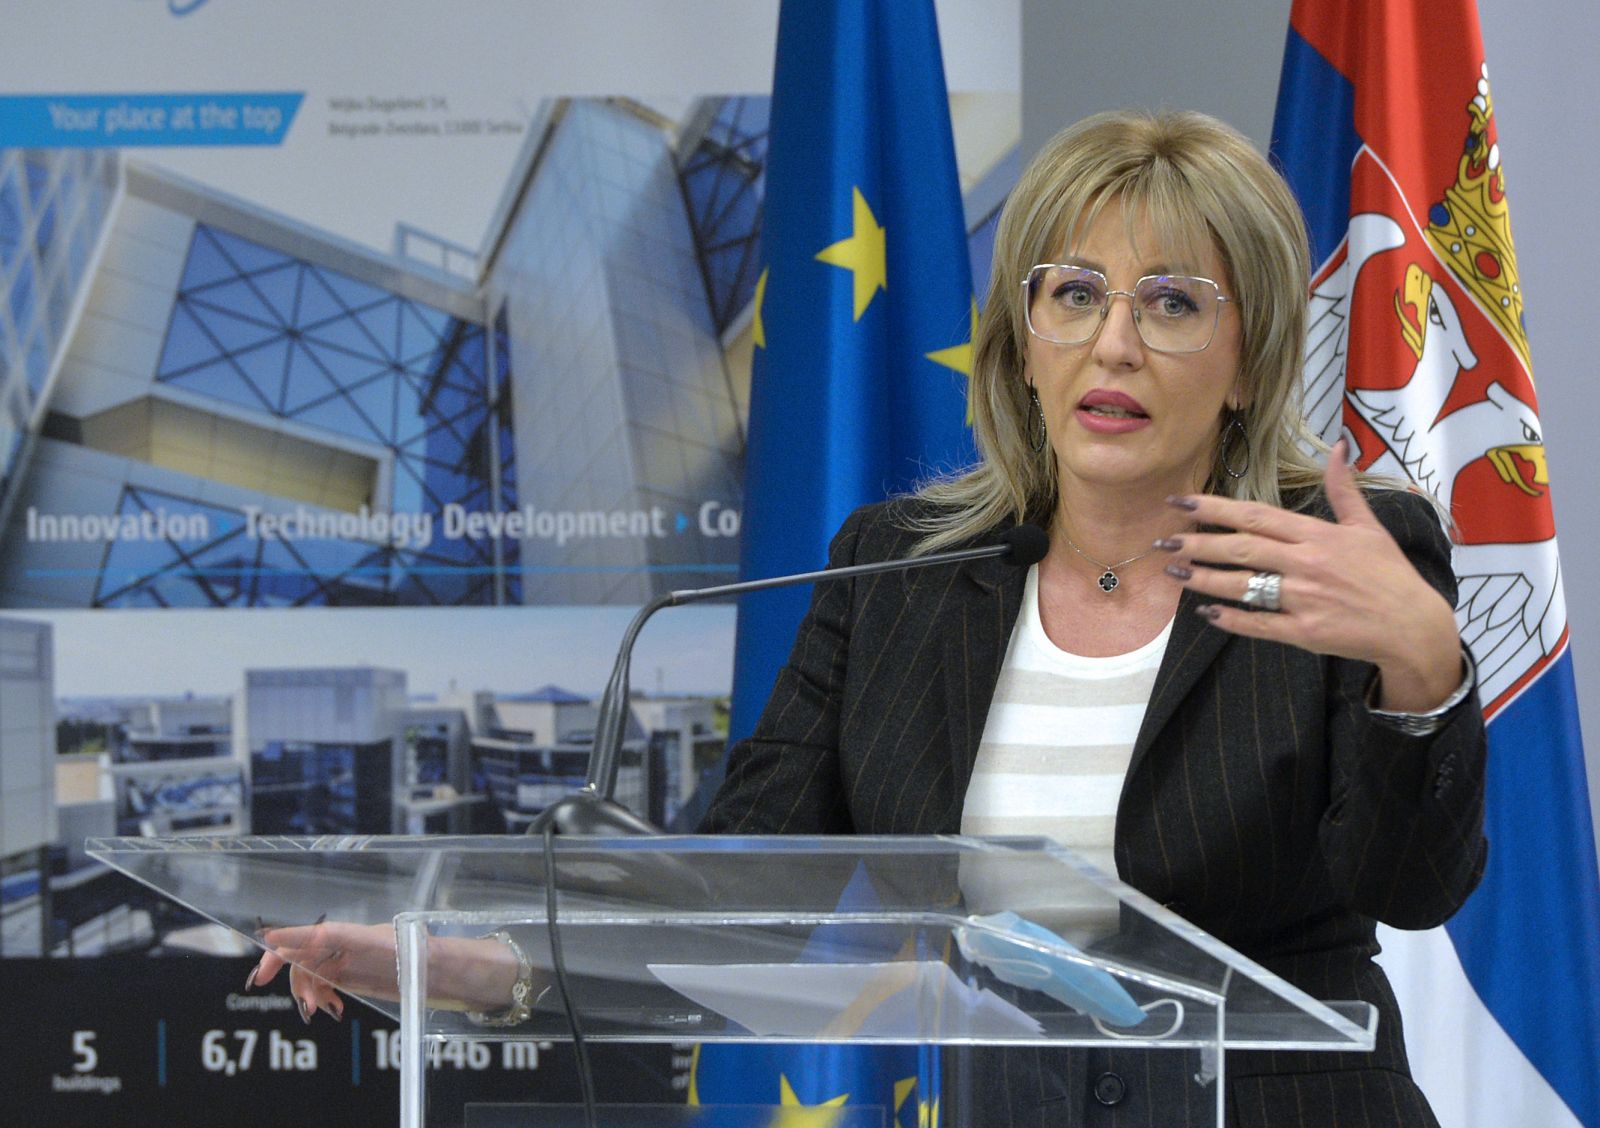 J. Joksimović: I expect the opening of at least one cluster